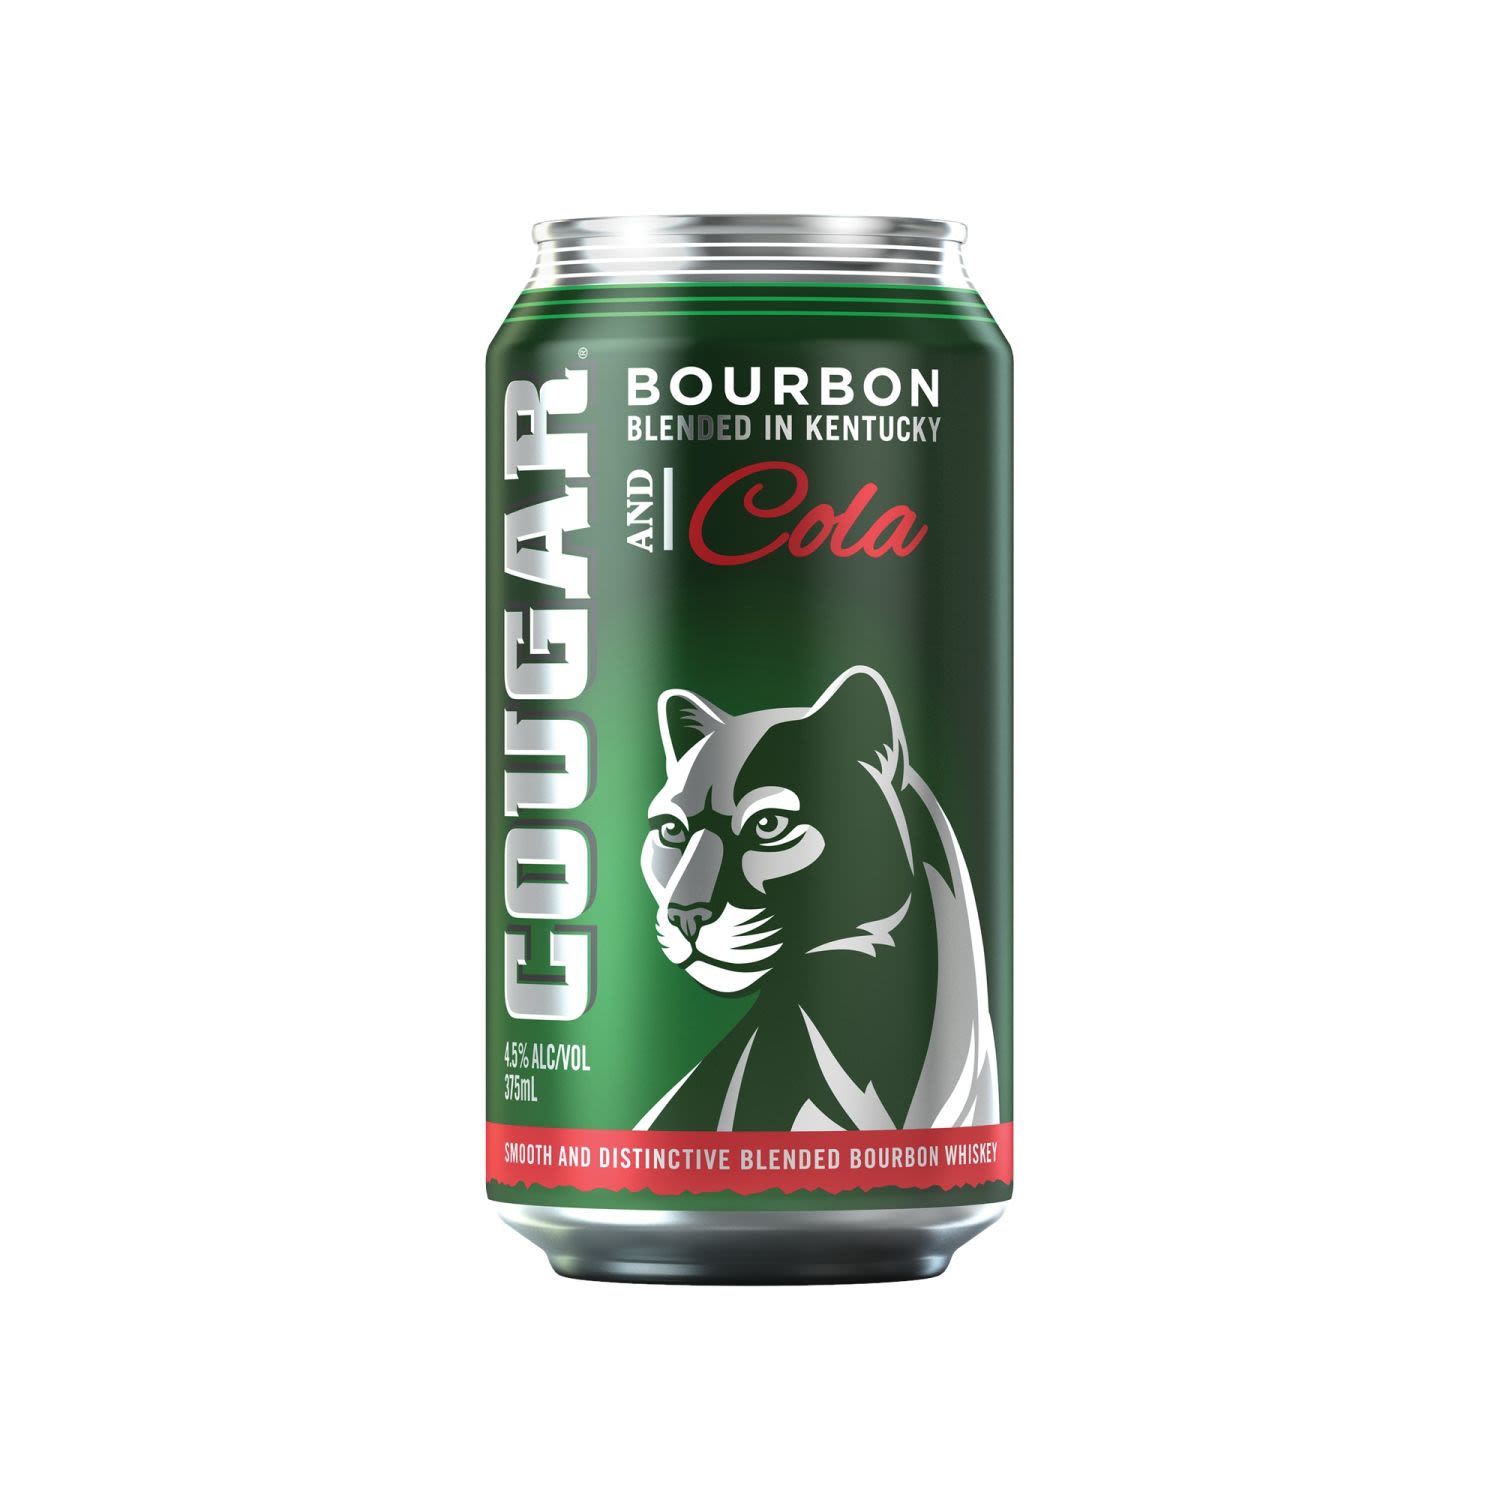 Cougar Bourbon and Cola Cans 375mL<br /> <br />Alcohol Volume: 4.50%<br /><br />Pack Format: Can<br /><br />Standard Drinks: 1.3</br /><br />Pack Type: Can<br />